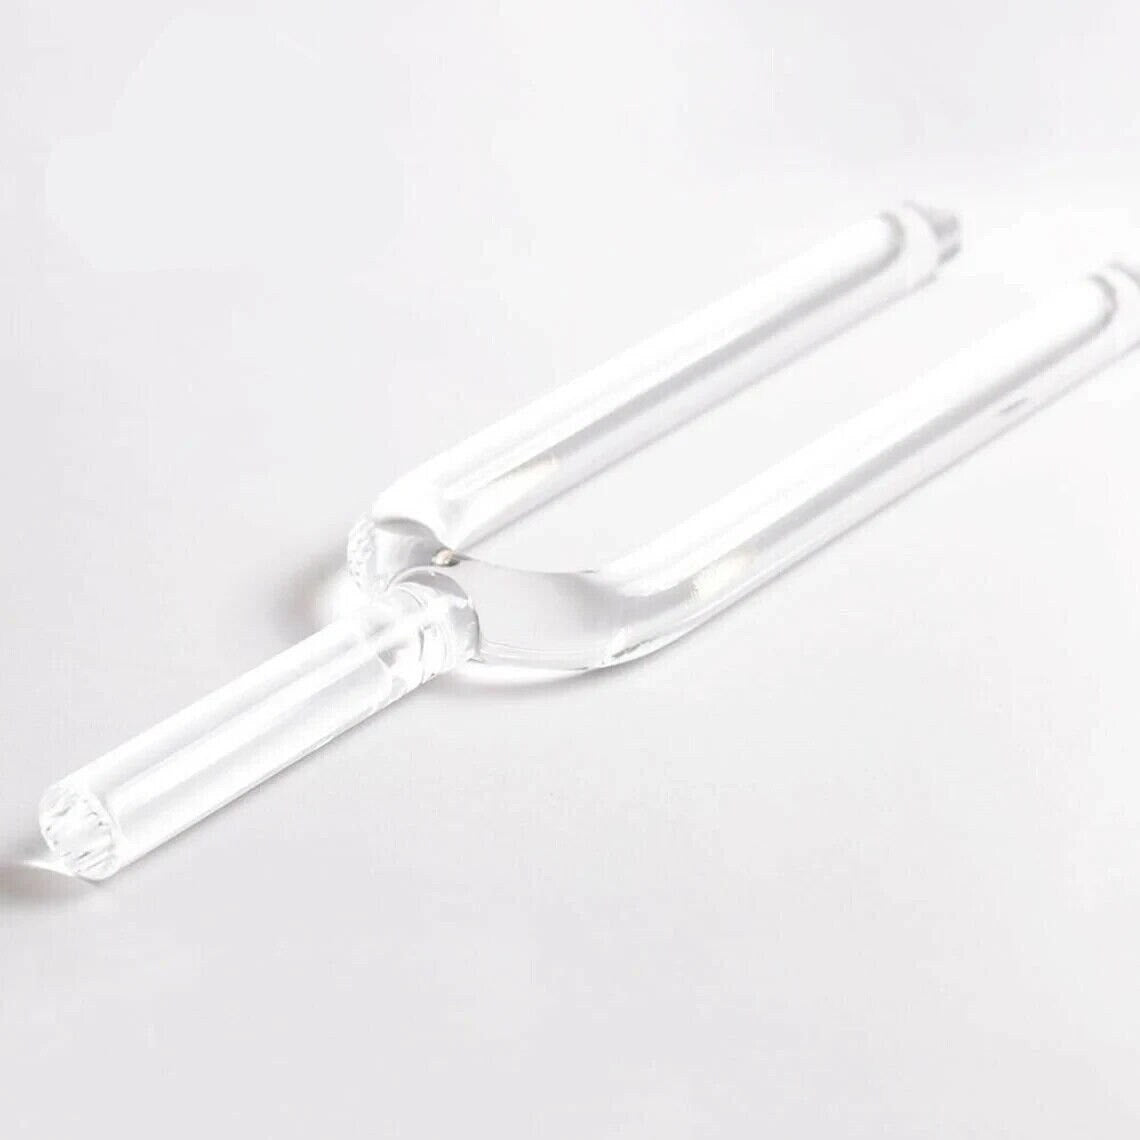 25mm Crystal Quartz F Note Tuning Fork Heart Chakra - Sound Lasts over a minute